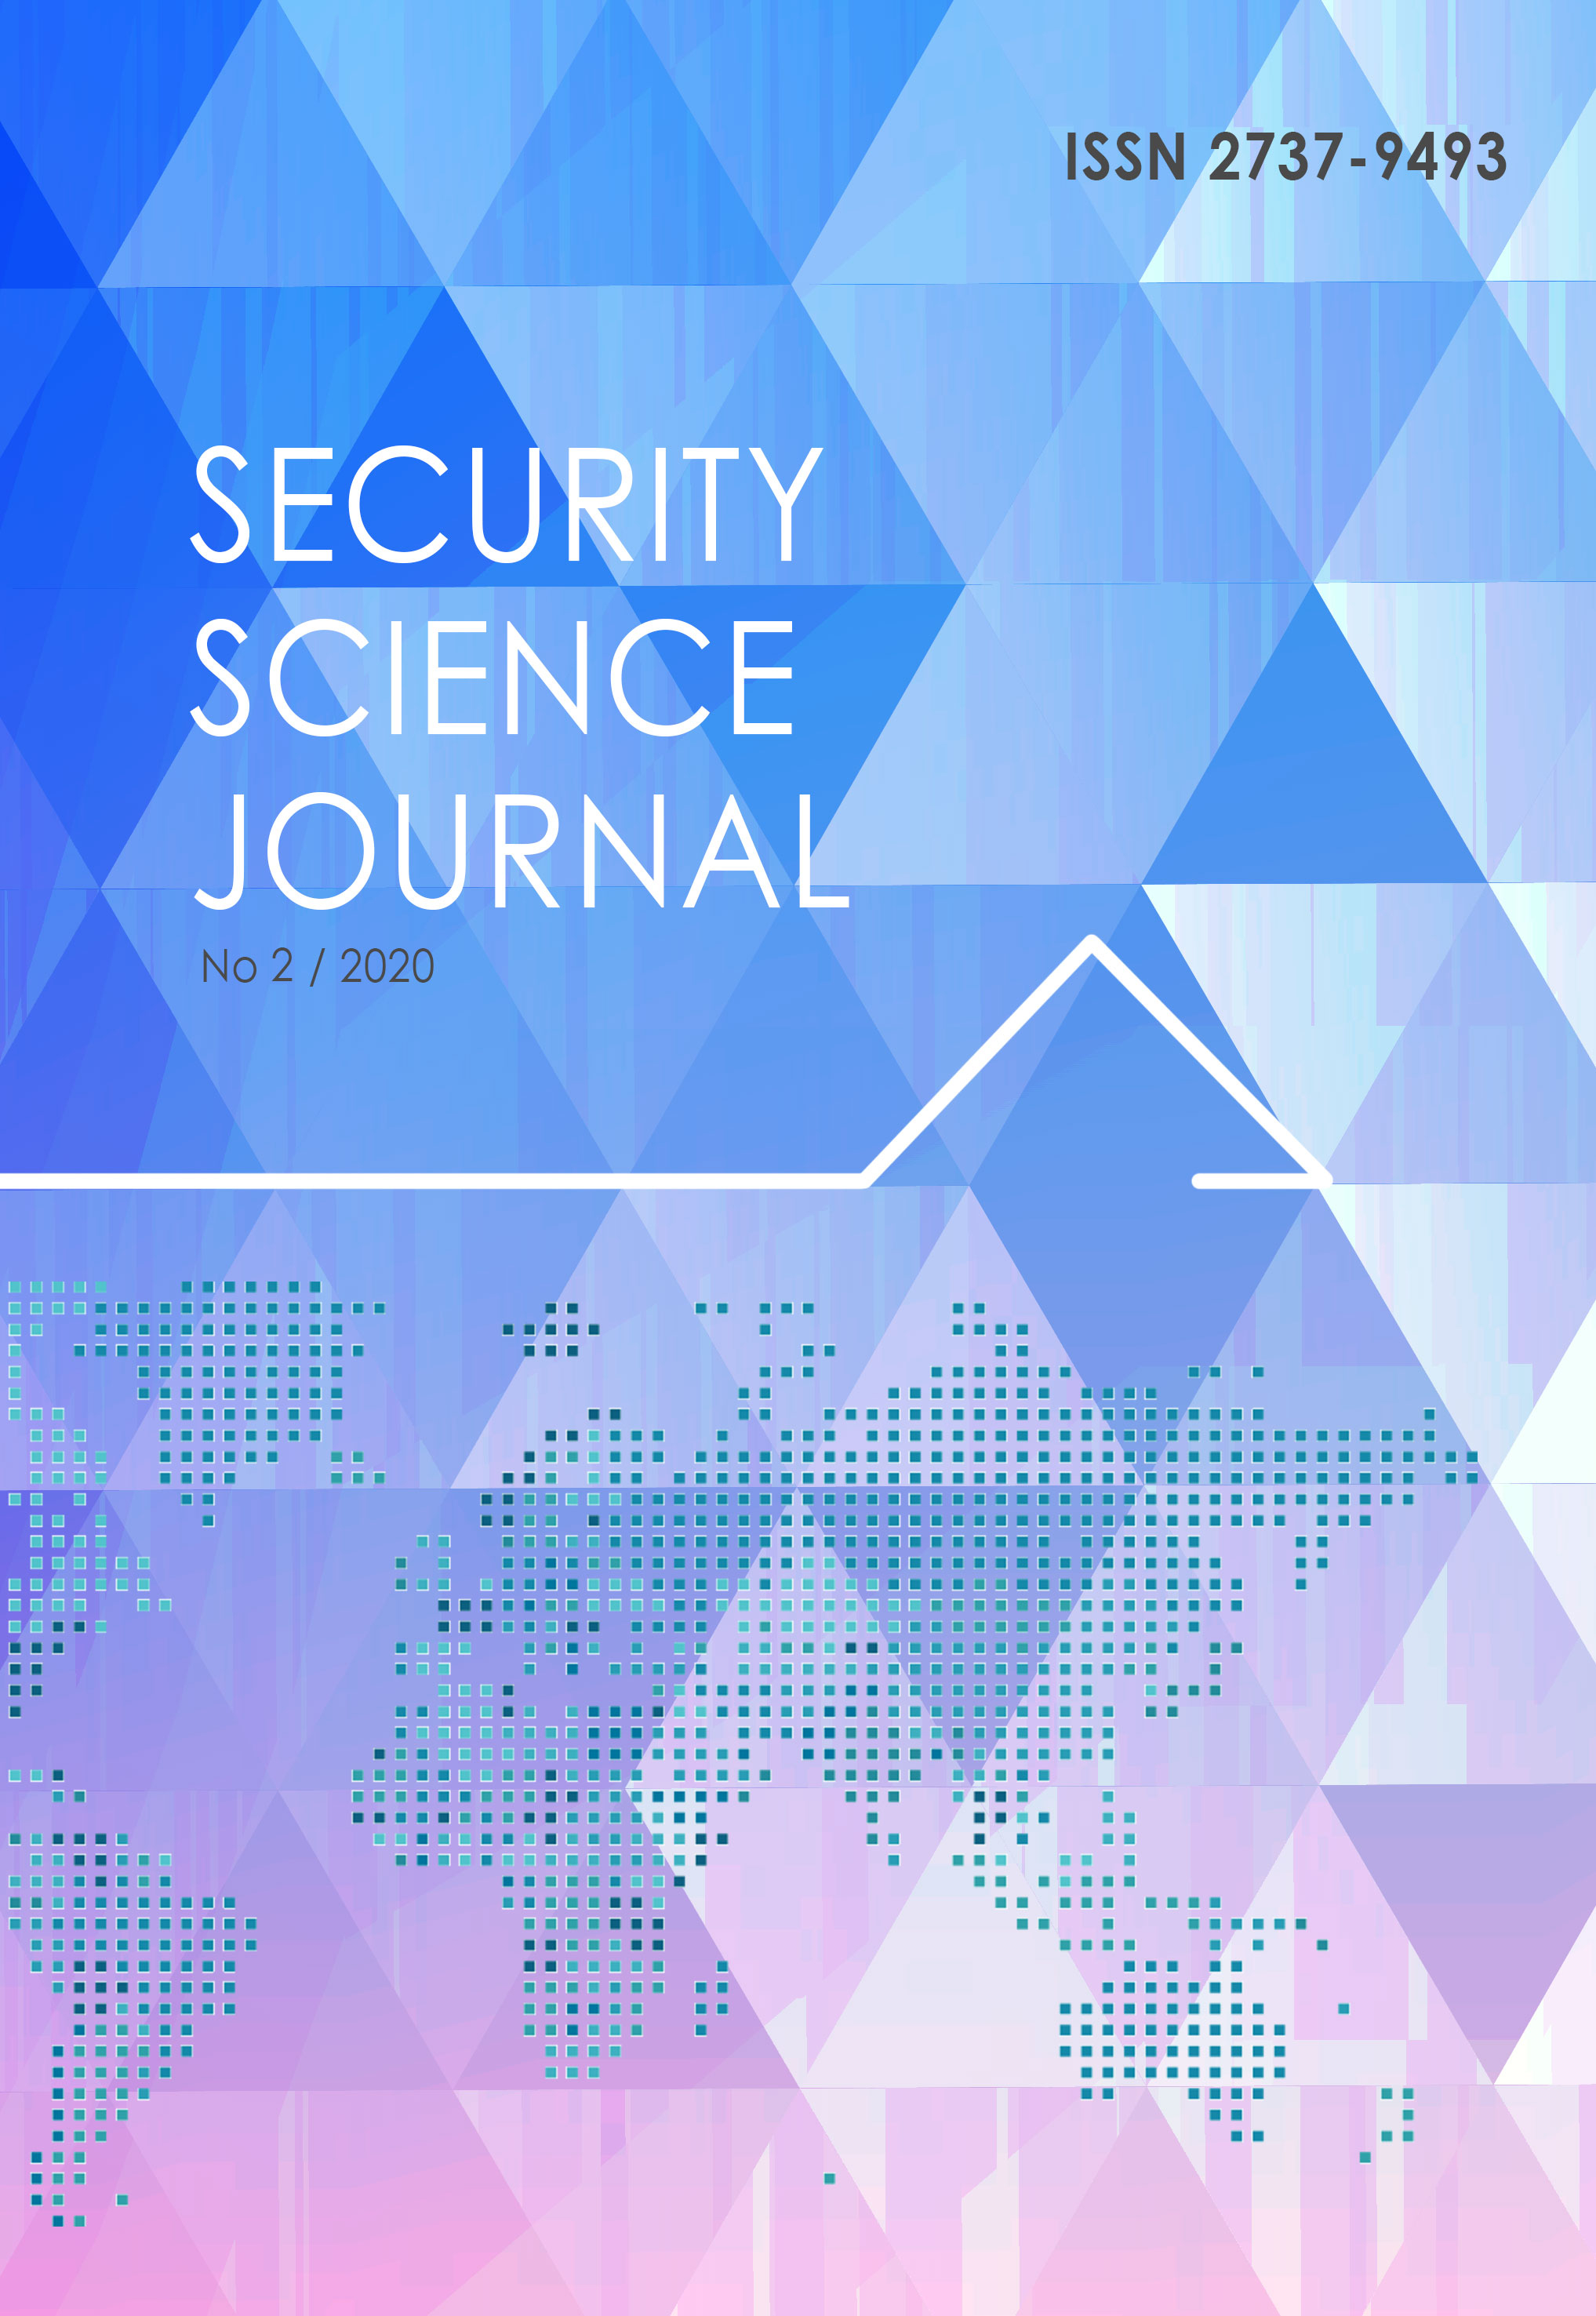 Security Science Journal Vol.1 No.2